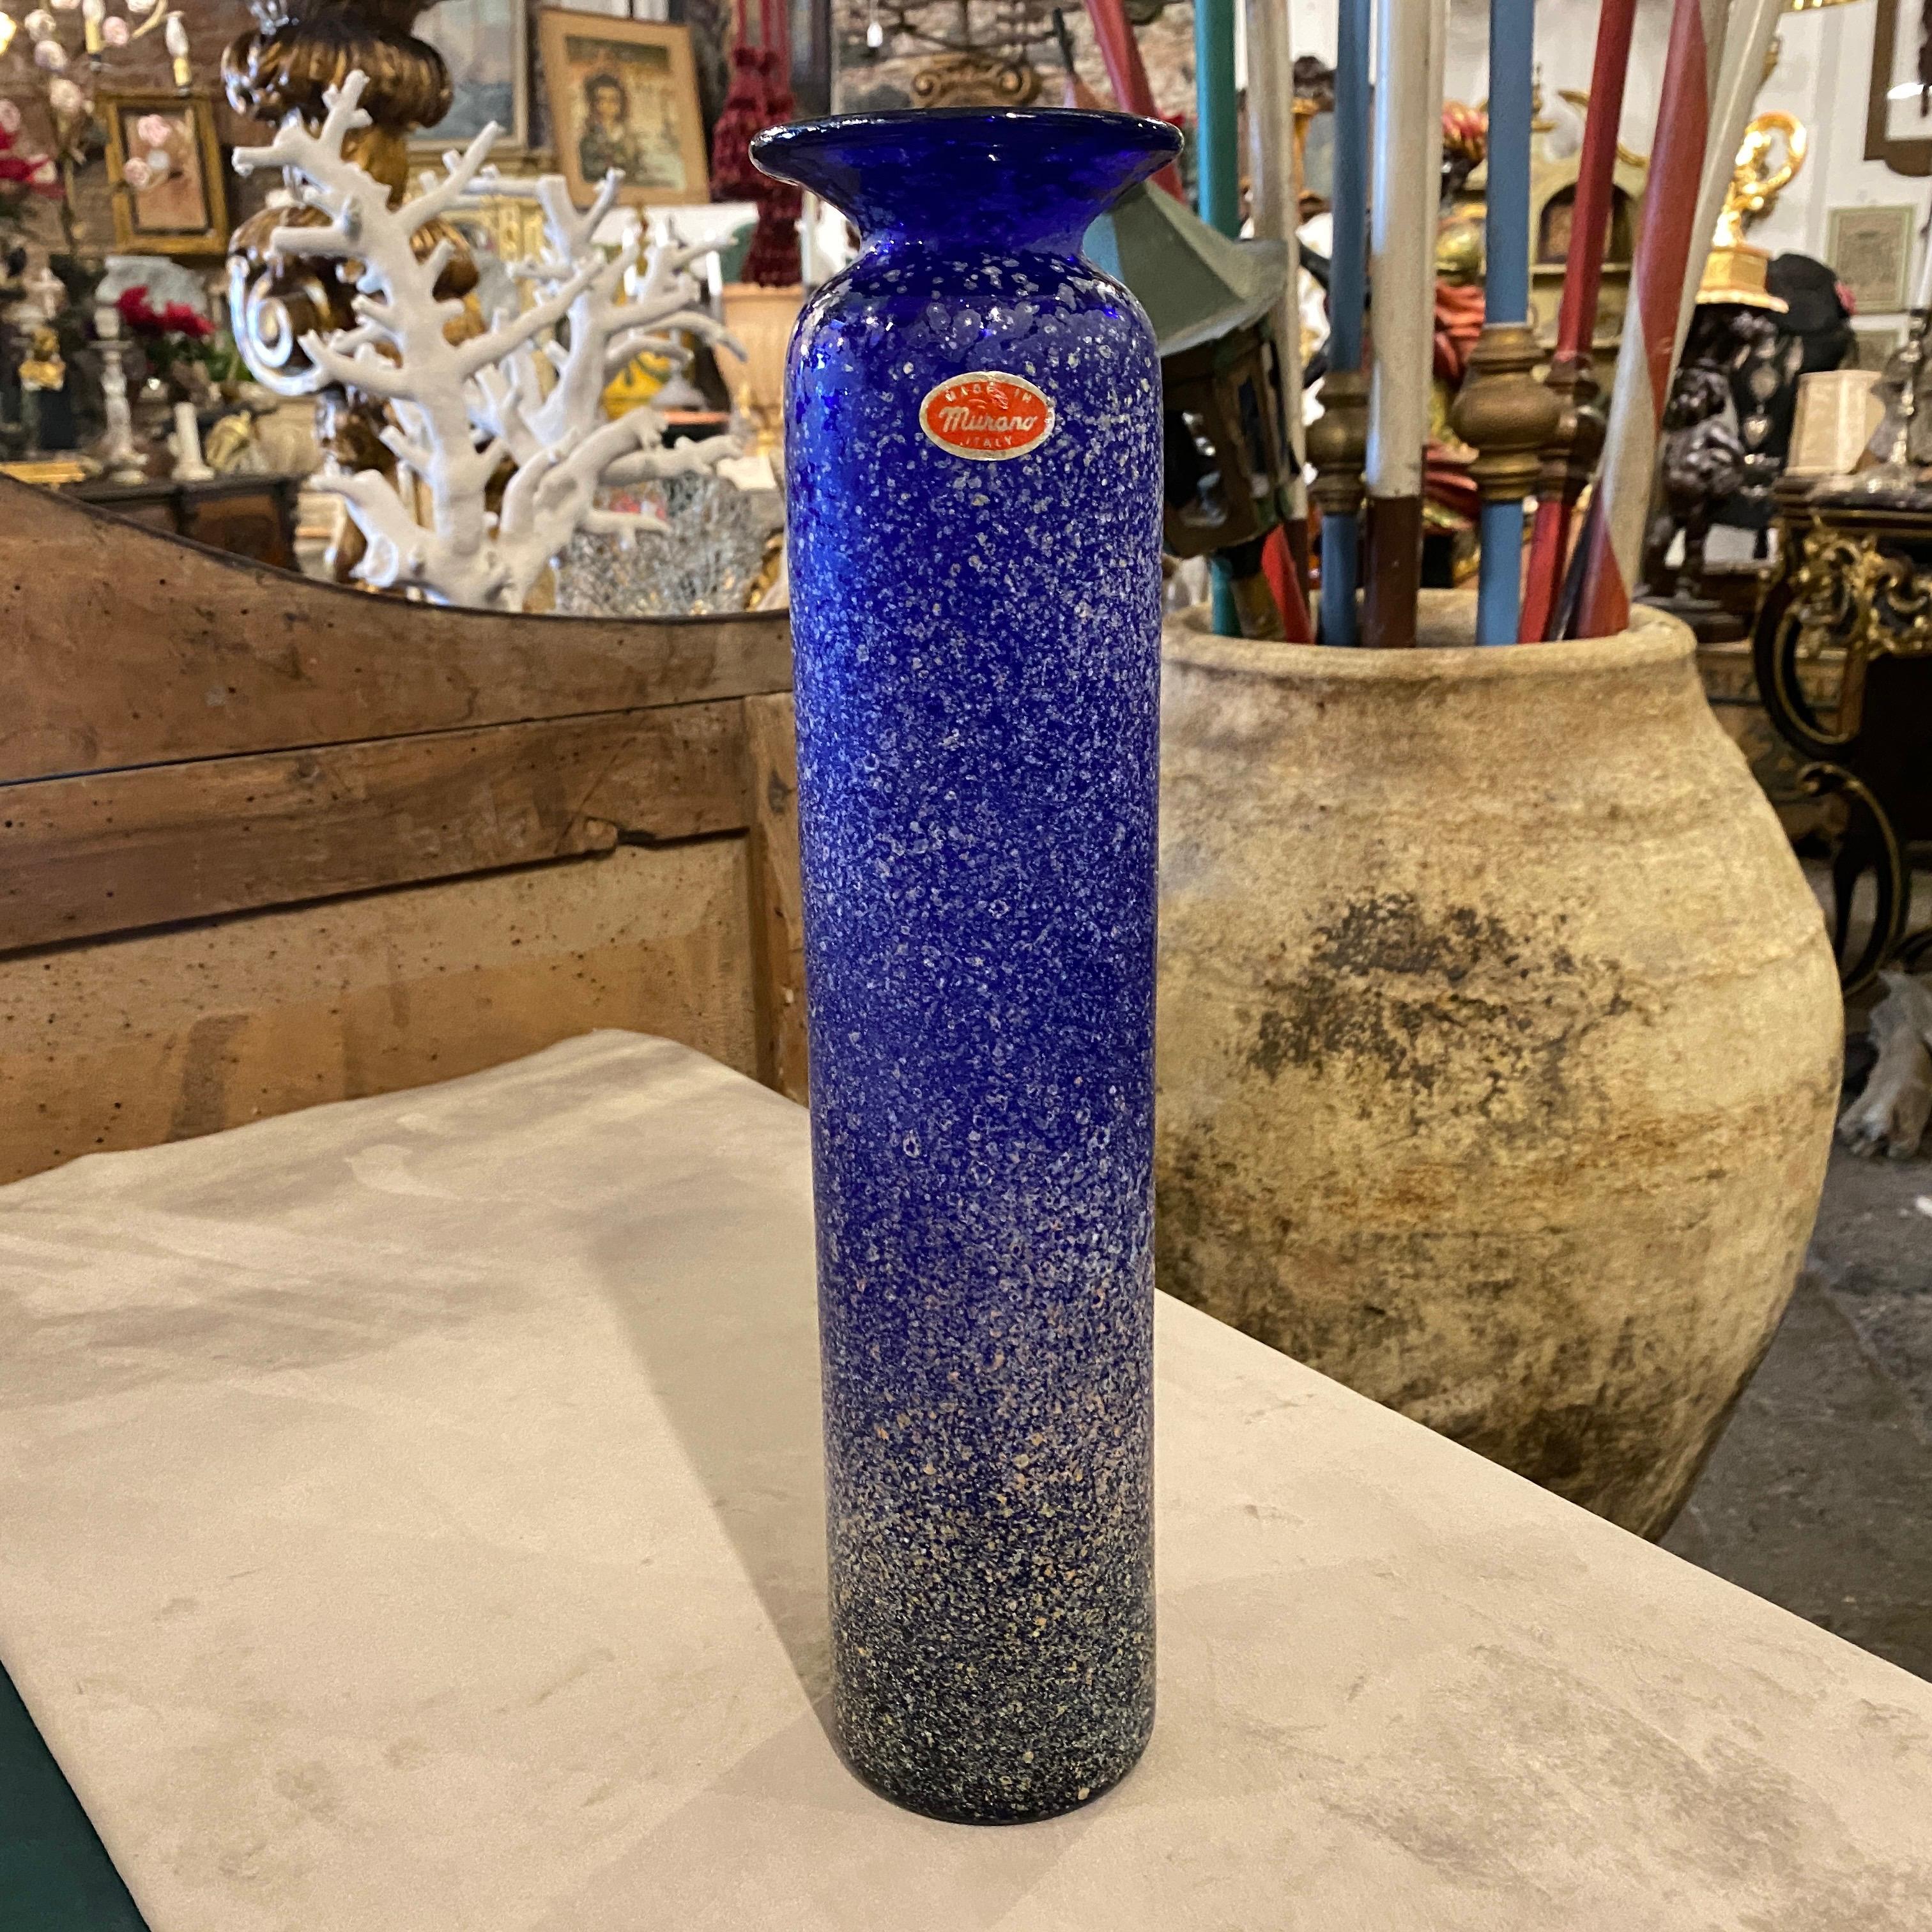 A rare blue scavo murano glass vase made in the Sixties, the particular color of the glass and its modernist shape make it an item attributable to Cenedese.